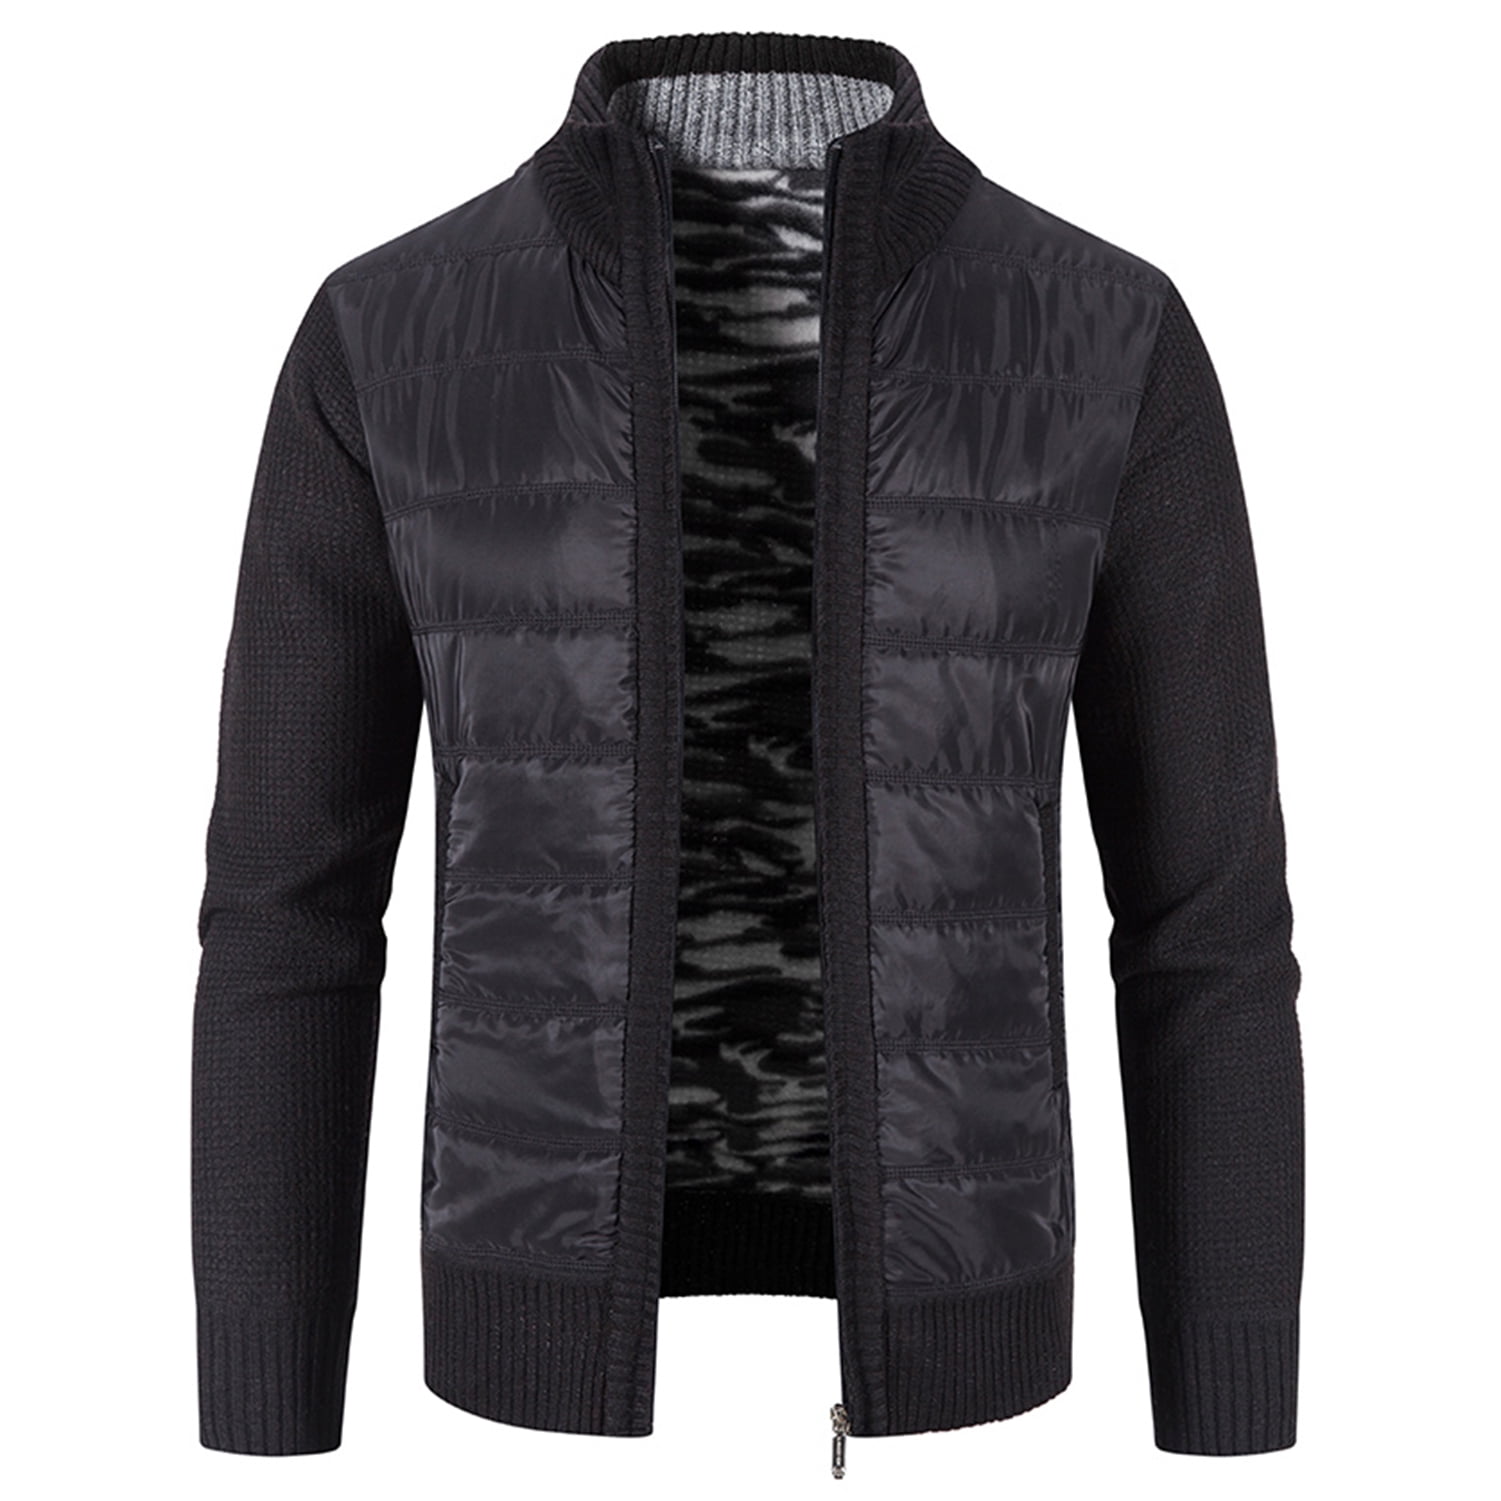 SWSMCLT Men's Winter Quilted Puff Jackets Thermal Warm Slim Fit Long ...